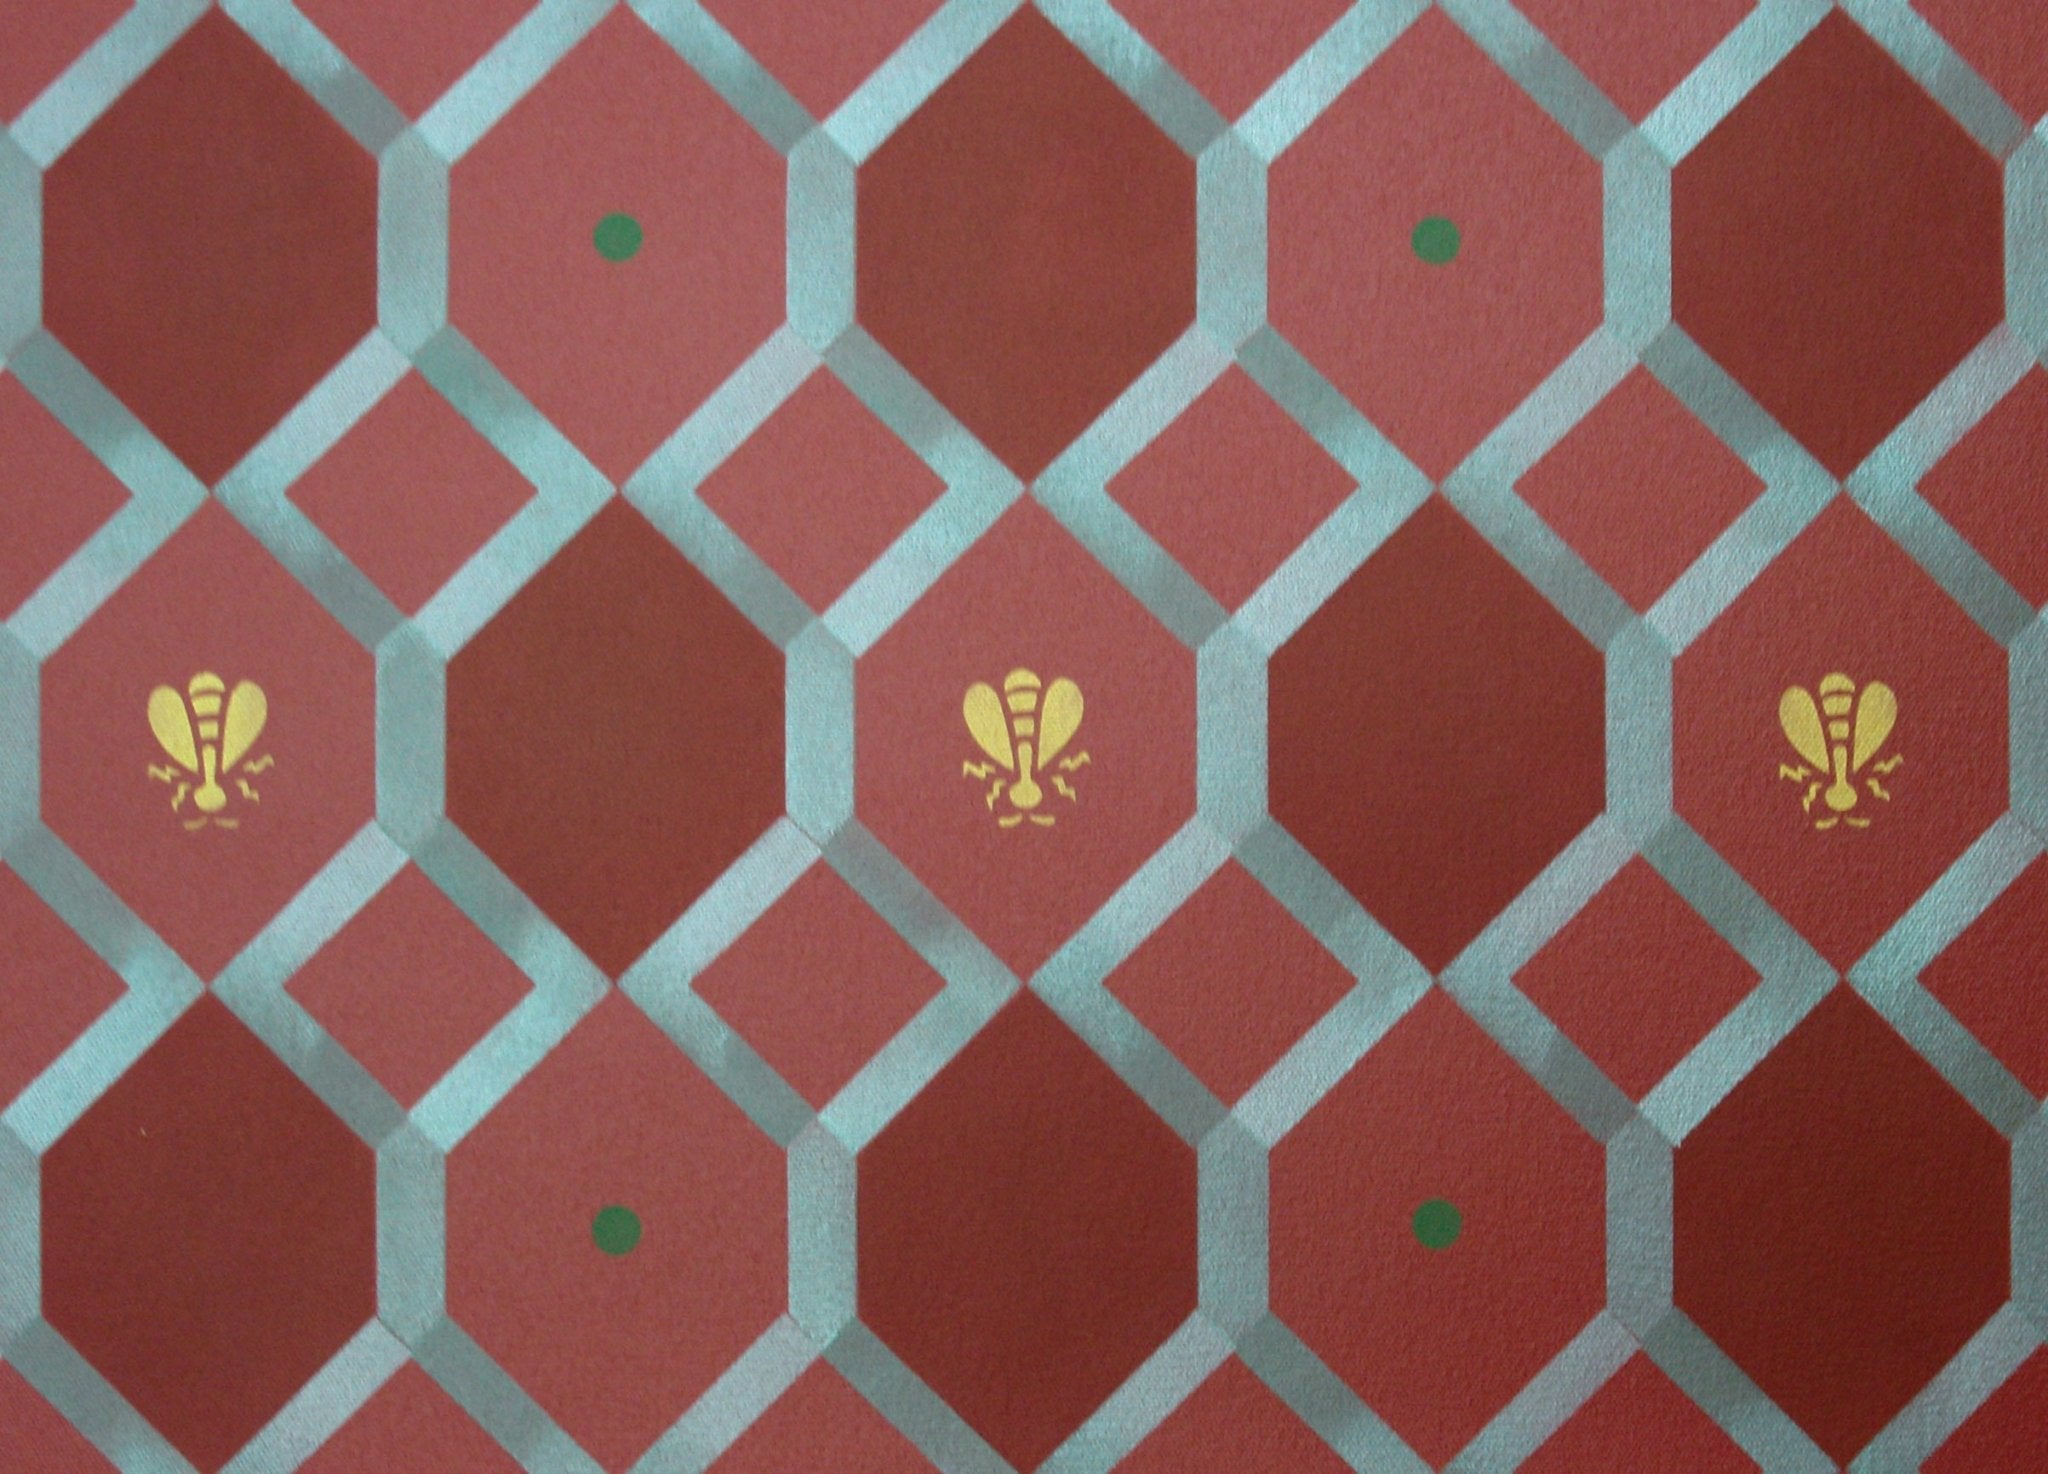 A close up of the center motifs, including the honeycomb, dots and bees, for the Honeycomb Floorcloth #1.